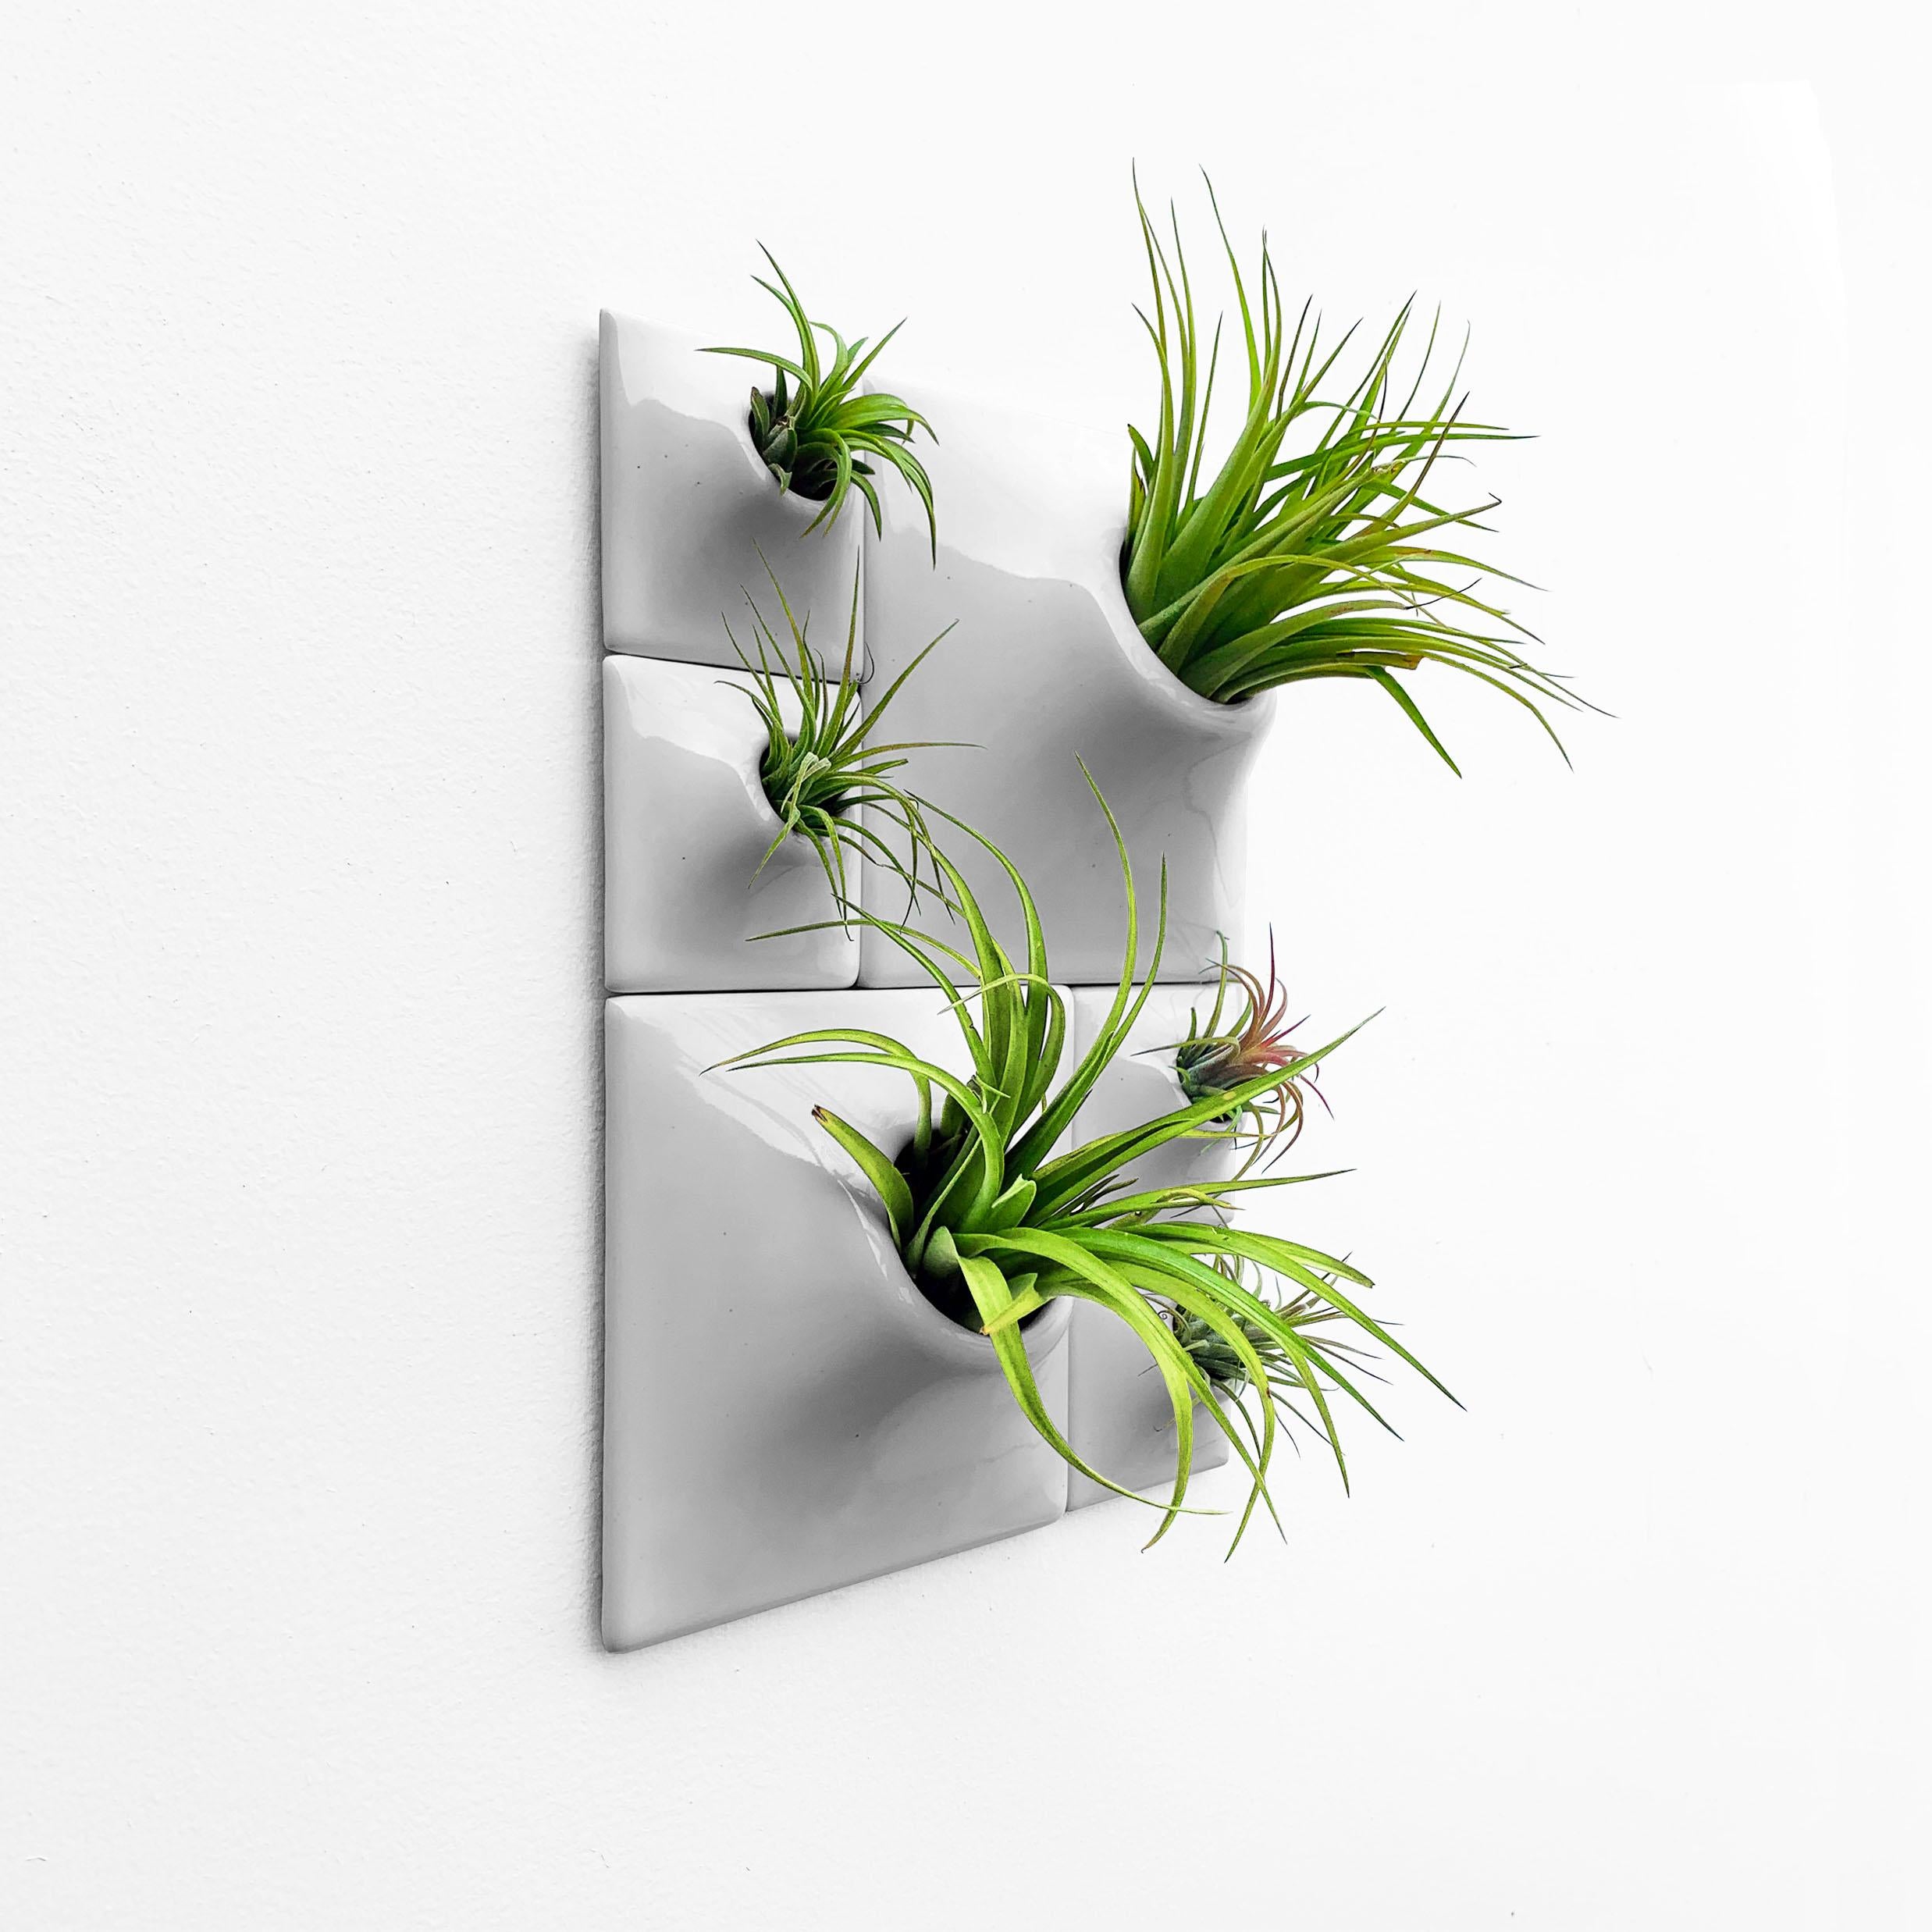 Modern Gray Wall Planter Set, Living Wall Sculpture, Moss Wall Art, Node BR2L

Add a breathtaking modular plant wall or modern moss wall to any space with this eye catching Node Wall Planter set.  Elevate your home decor with living modern wall art